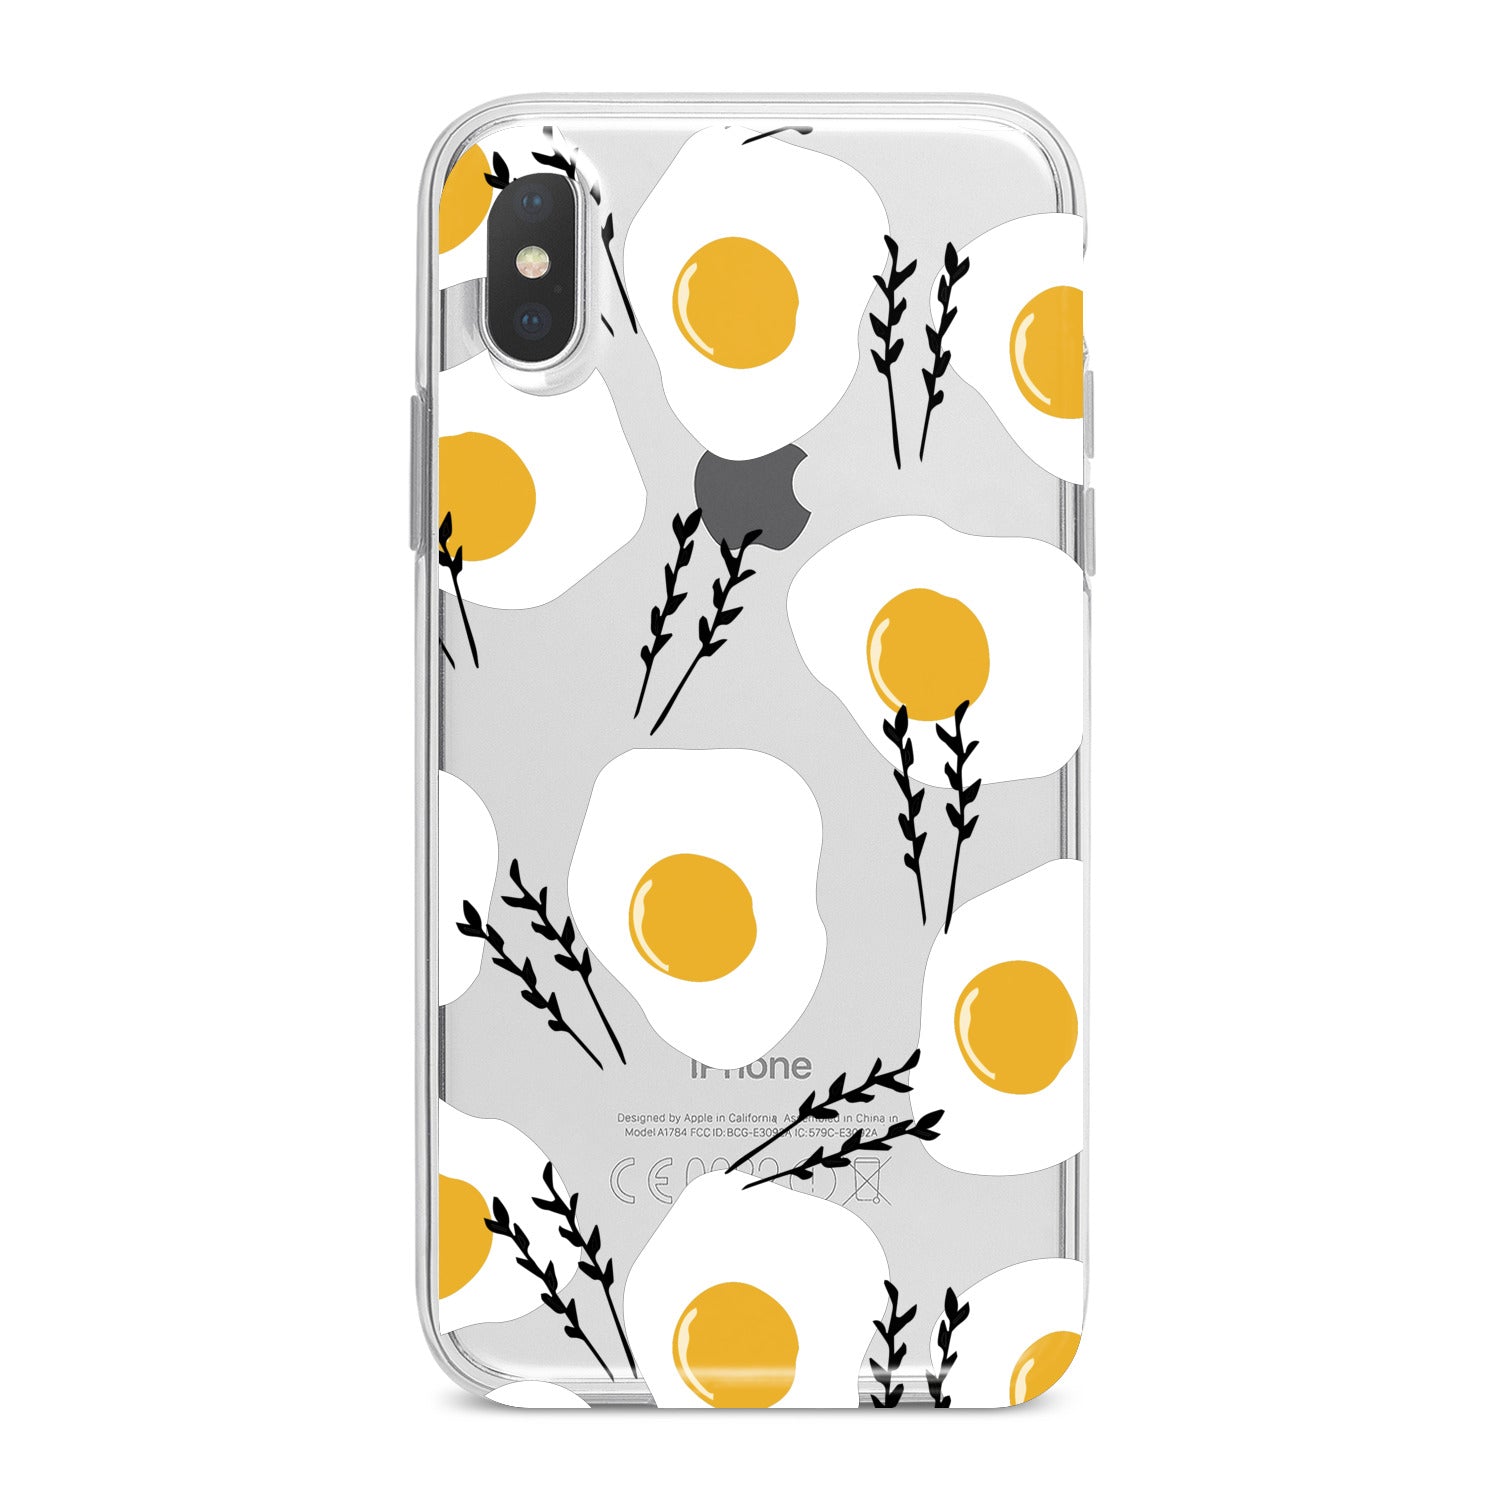 Lex Altern Scrambled Eggs Phone Case for your iPhone & Android phone.